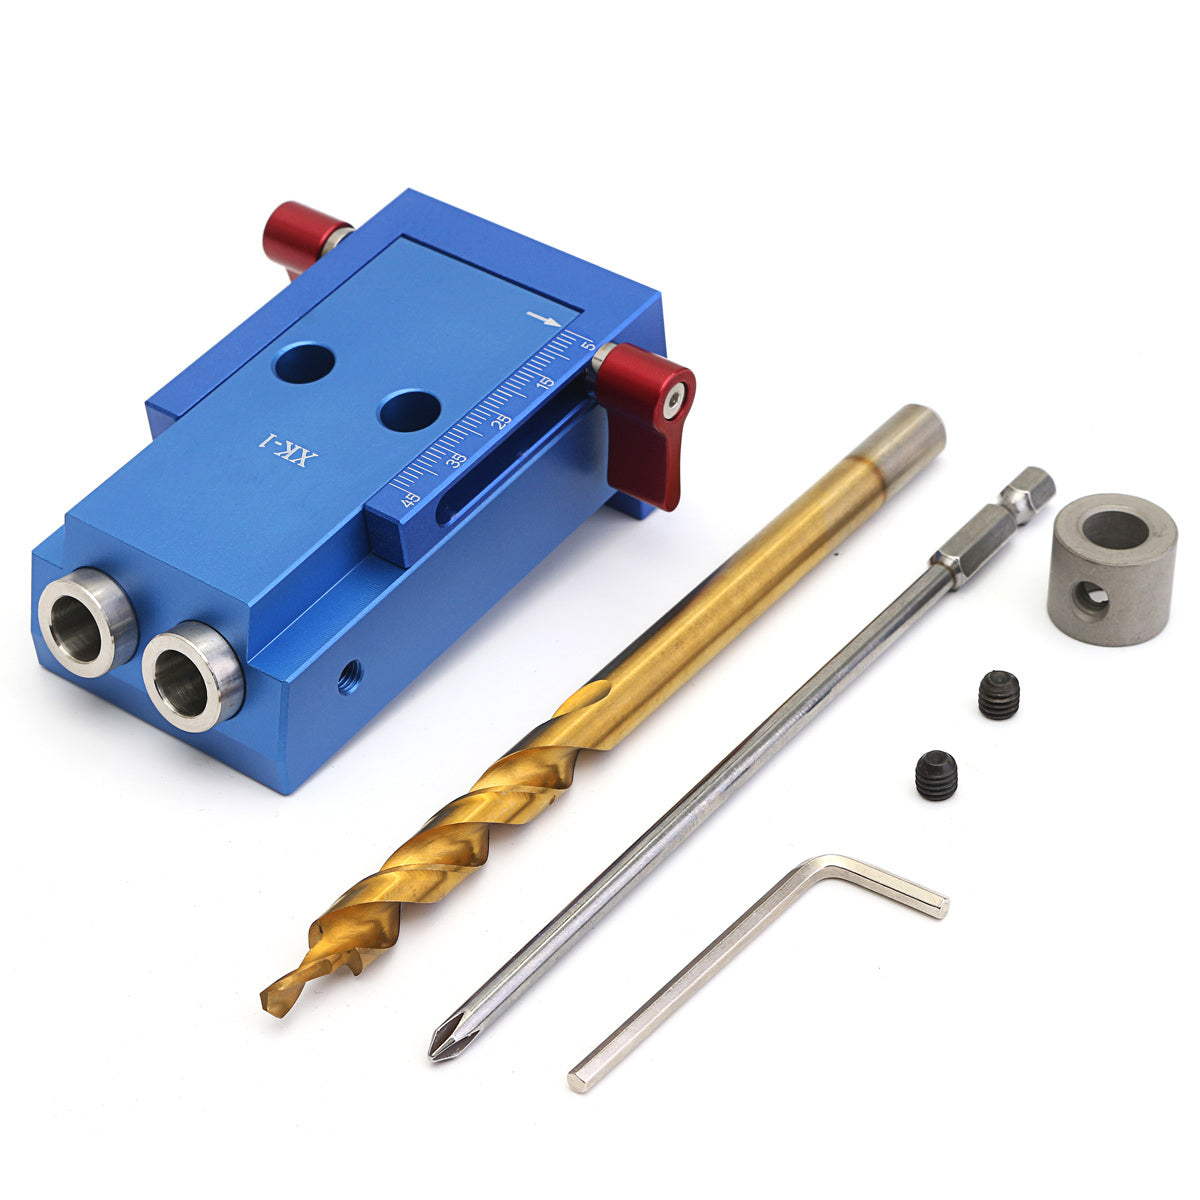 Pocket Hole Jig Kit Mini Hole Jig with Step Drill Bit For Woodworking